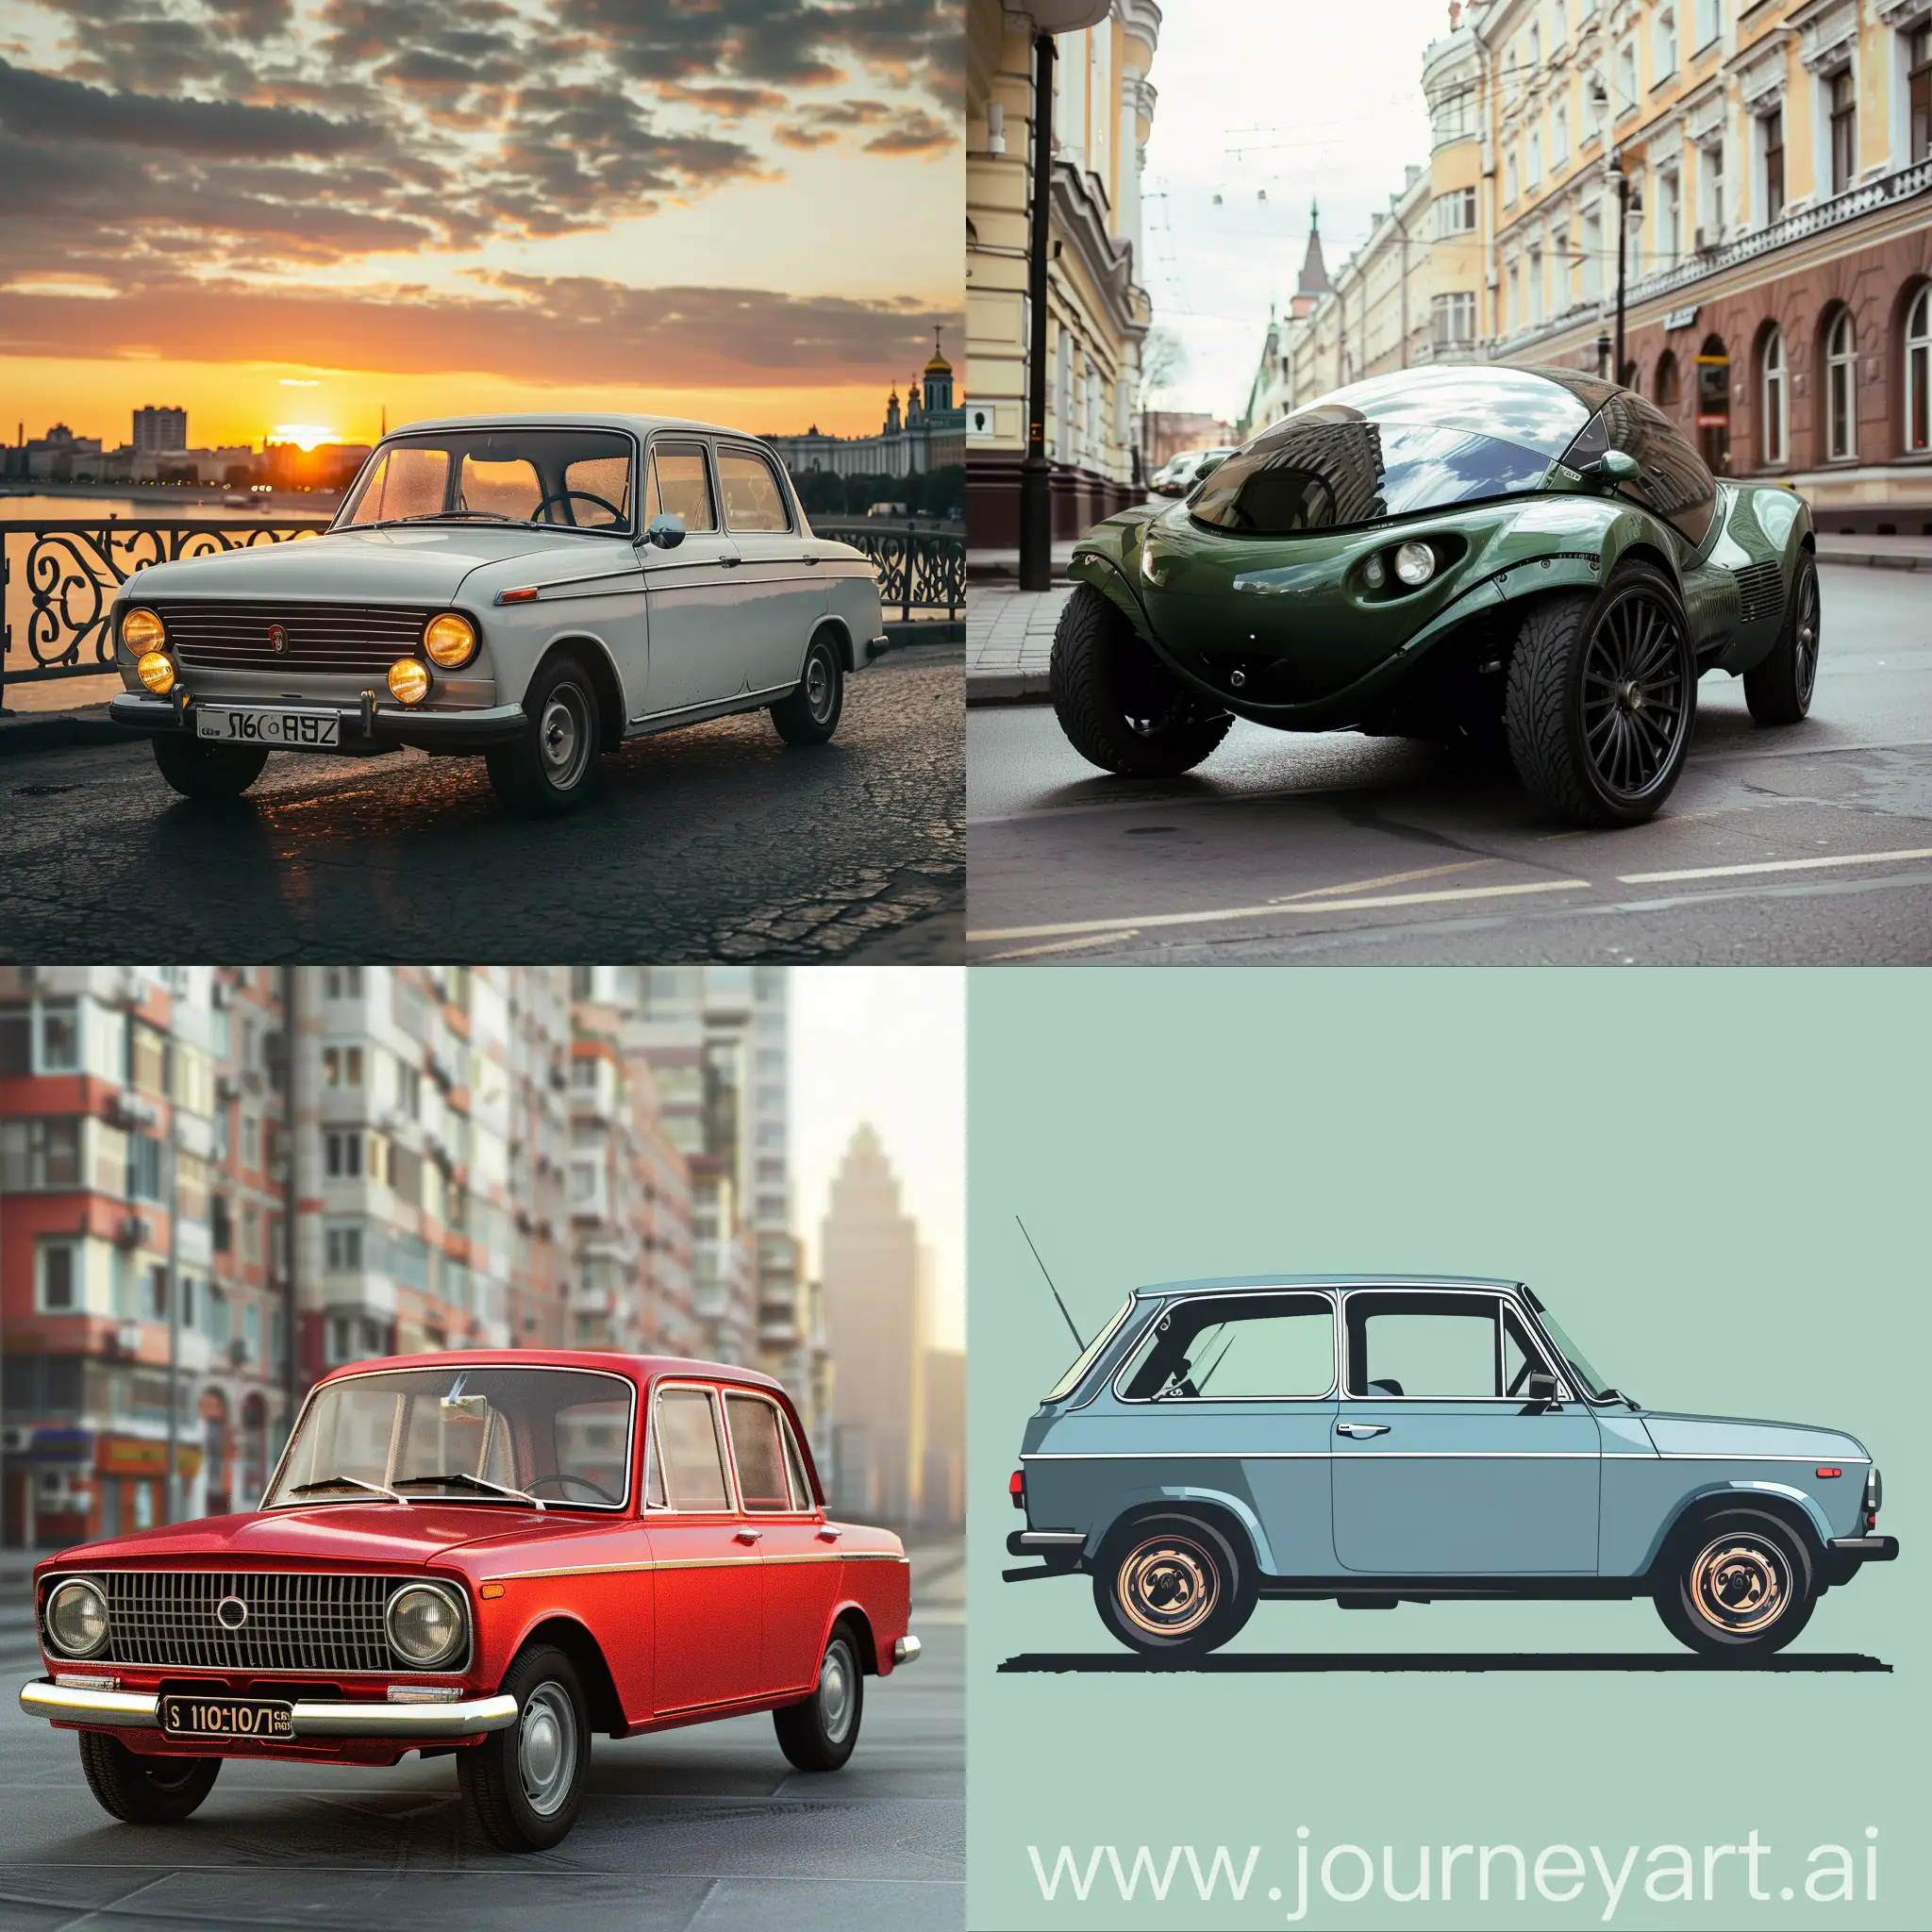 Vintage-Car-for-Sale-at-Affordable-Price-in-Russian-Market